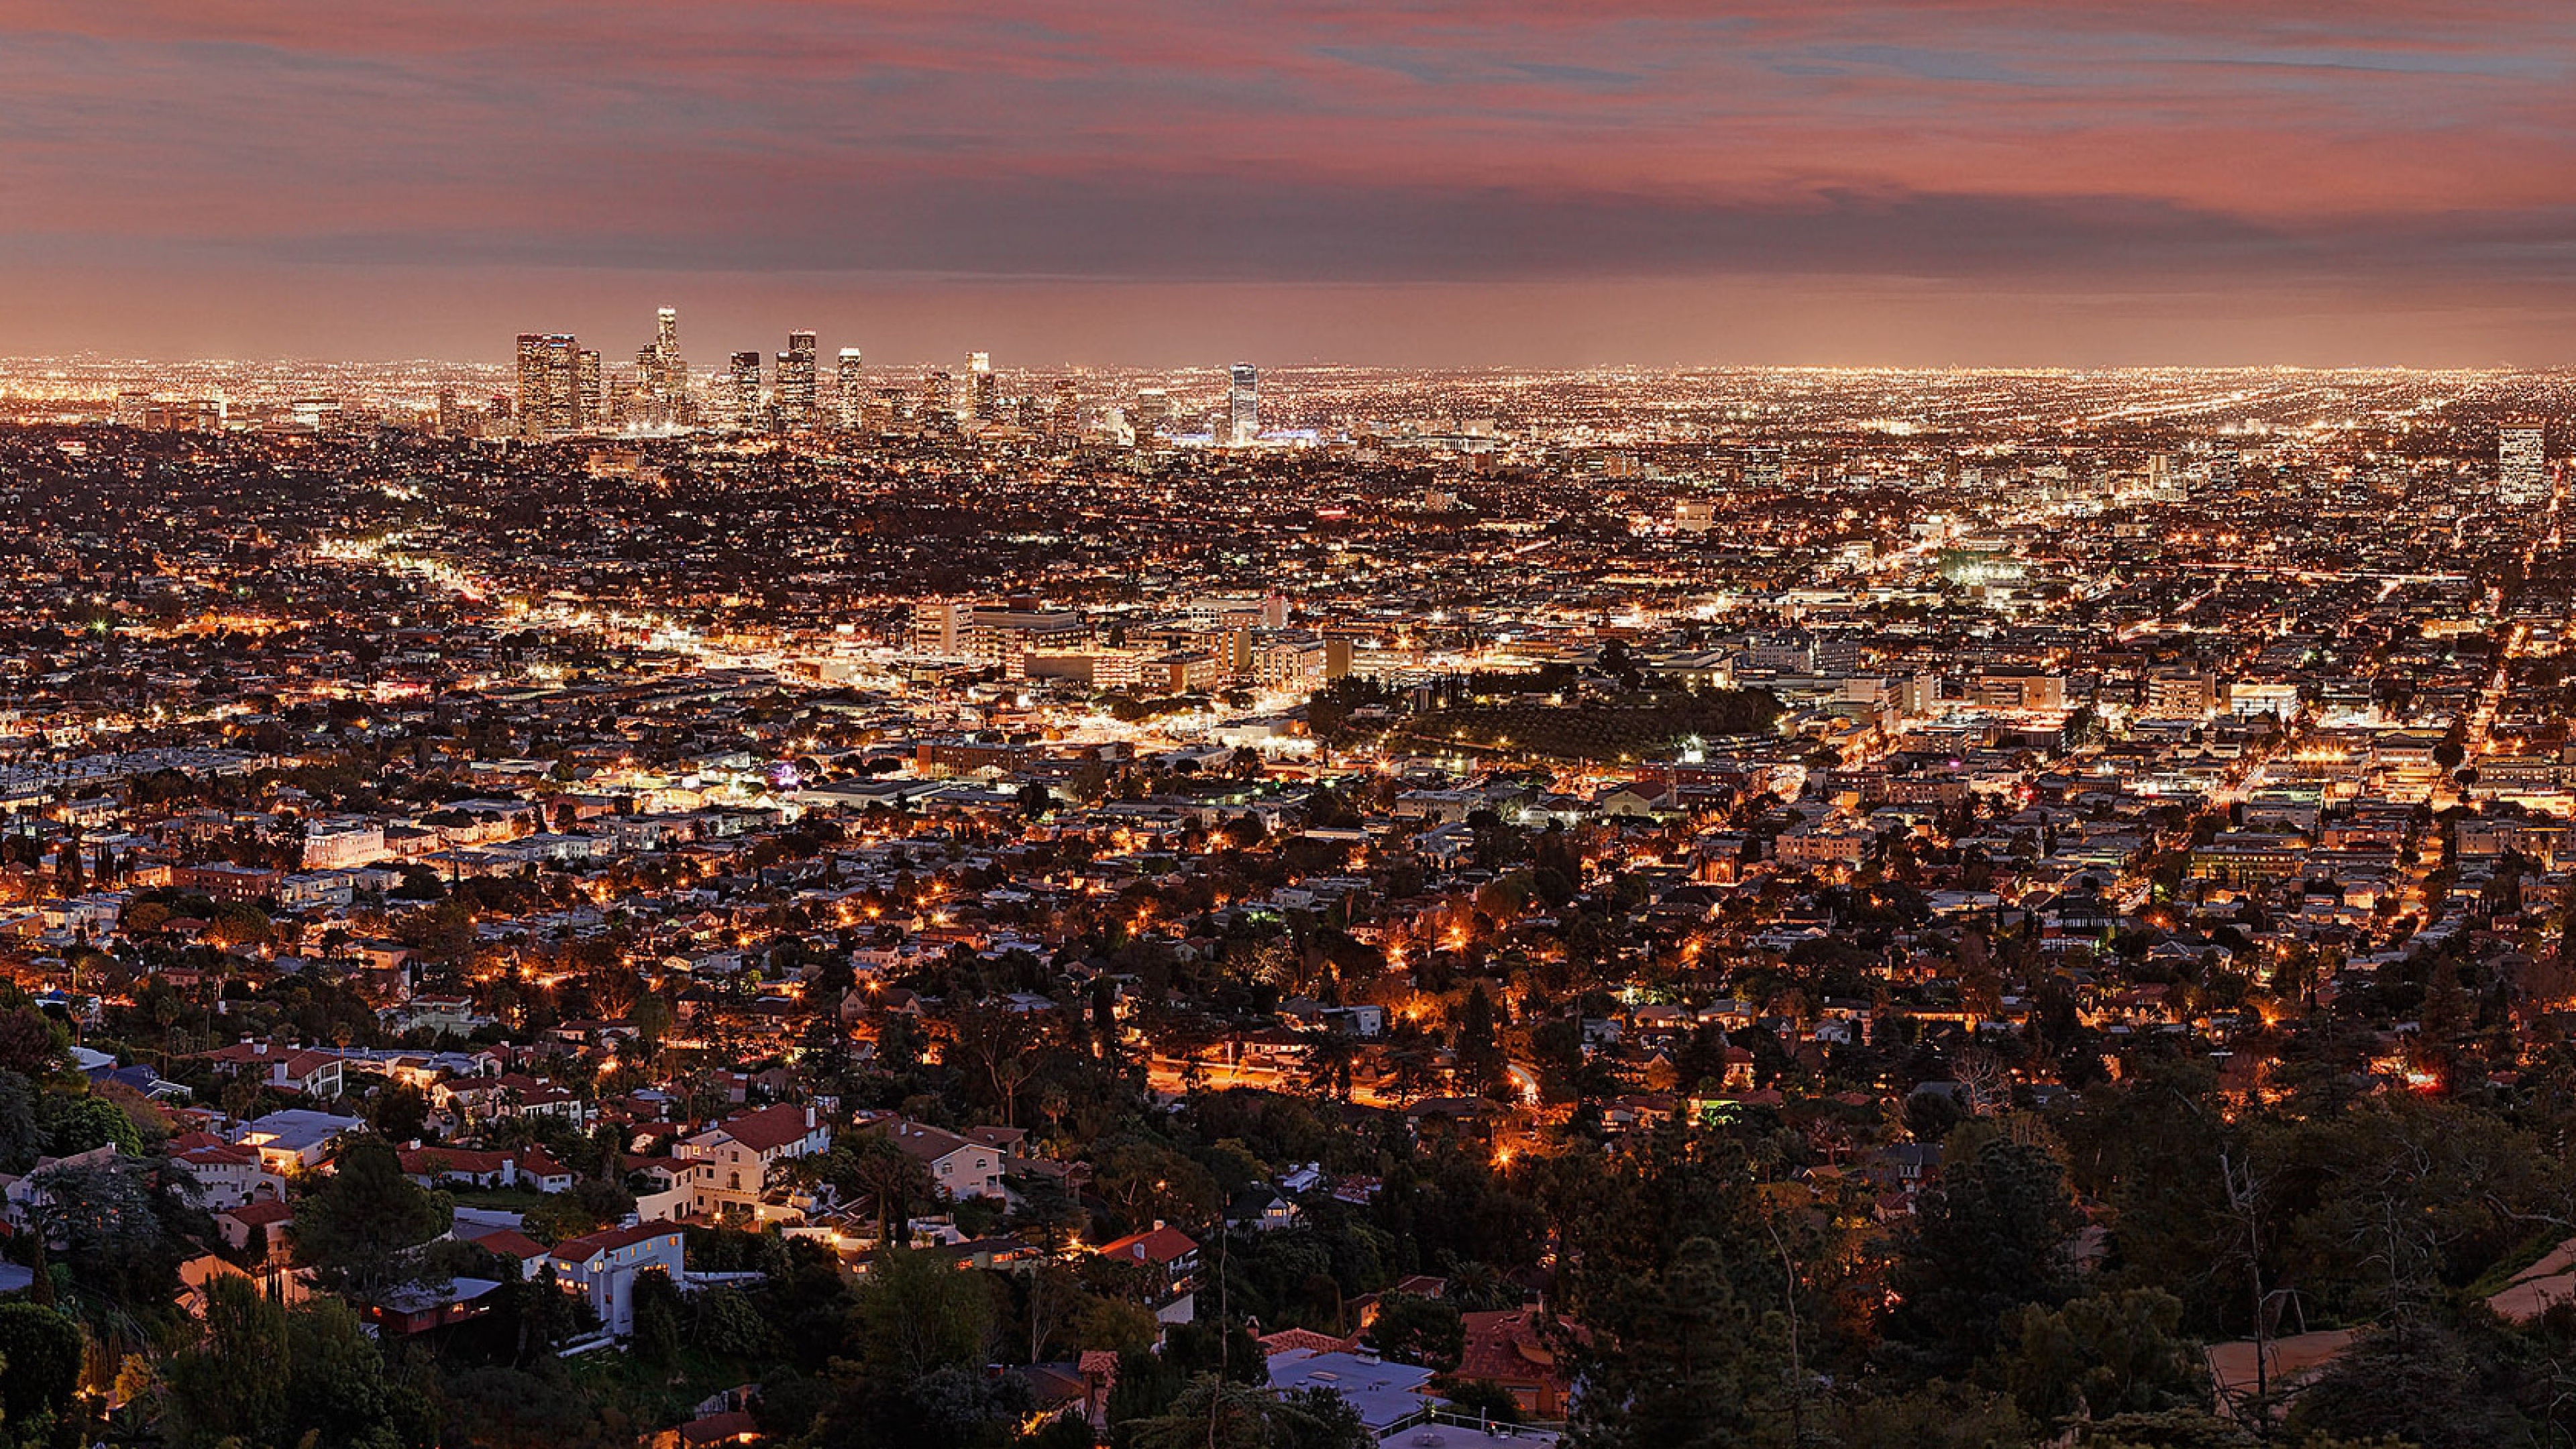 Los Angeles: LA, Night city lights, View from above. 3840x2160 4K Wallpaper.